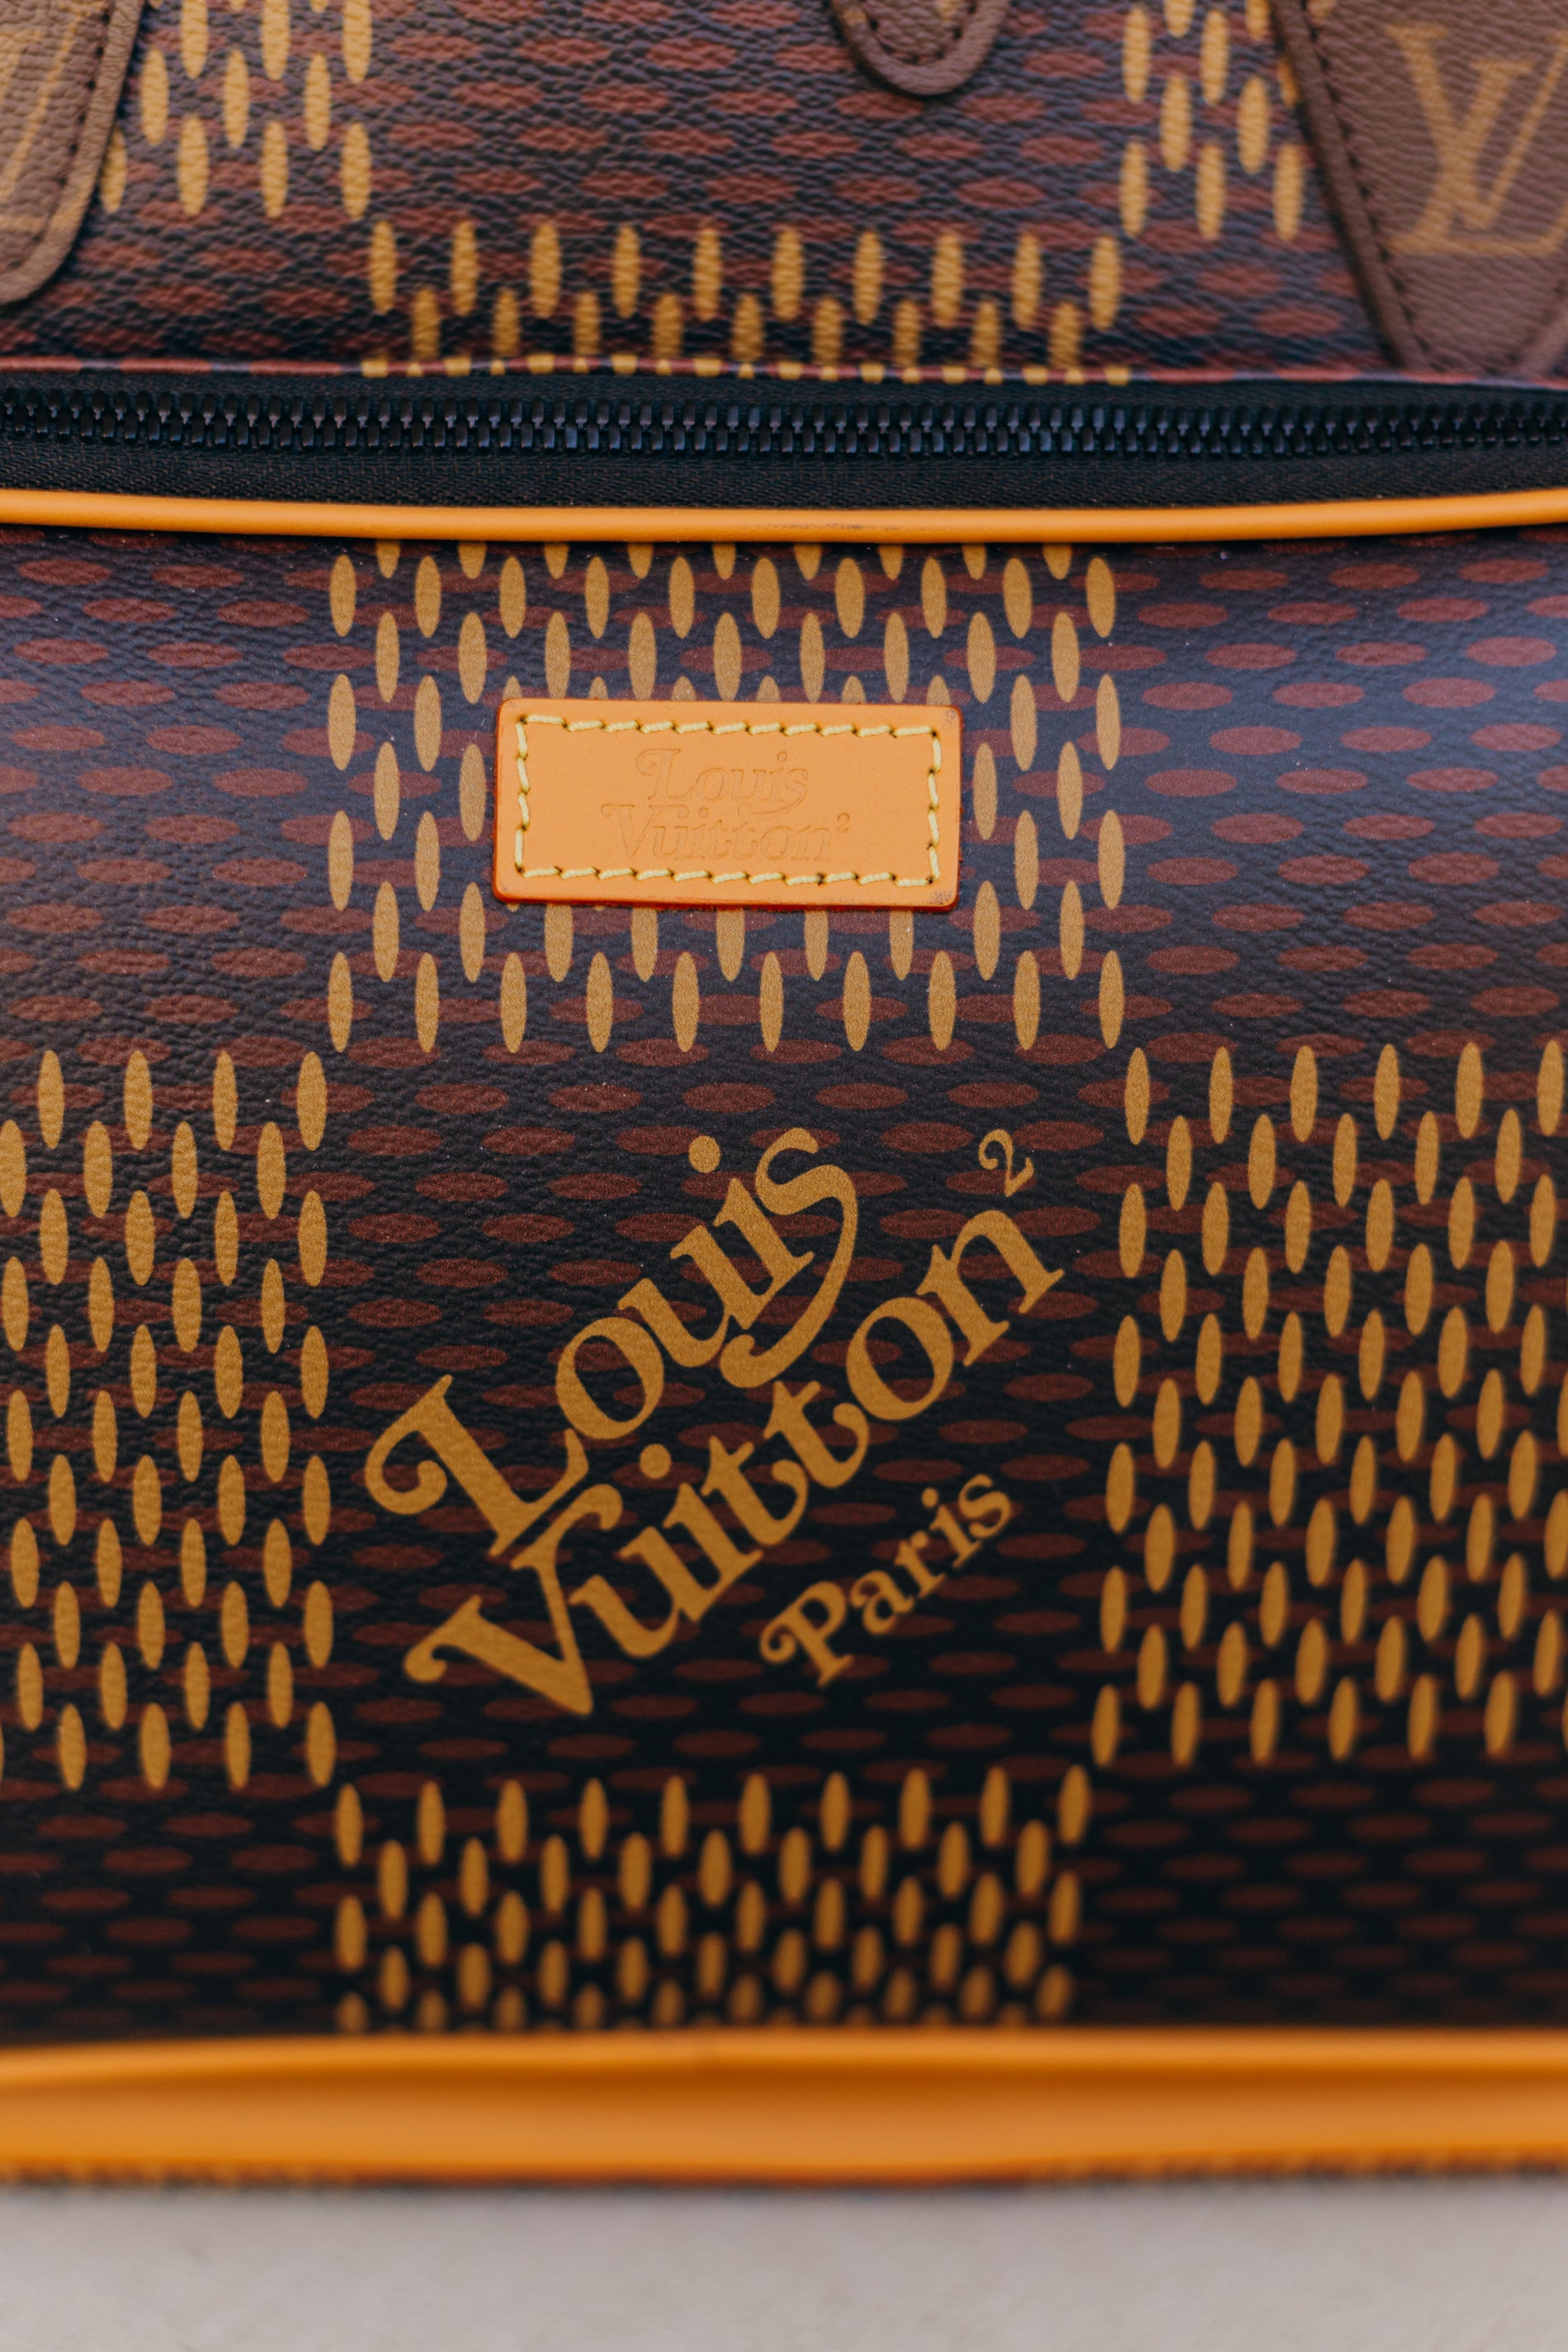 Does anyone know the Louis Vuitton Stephen Sprouse font or